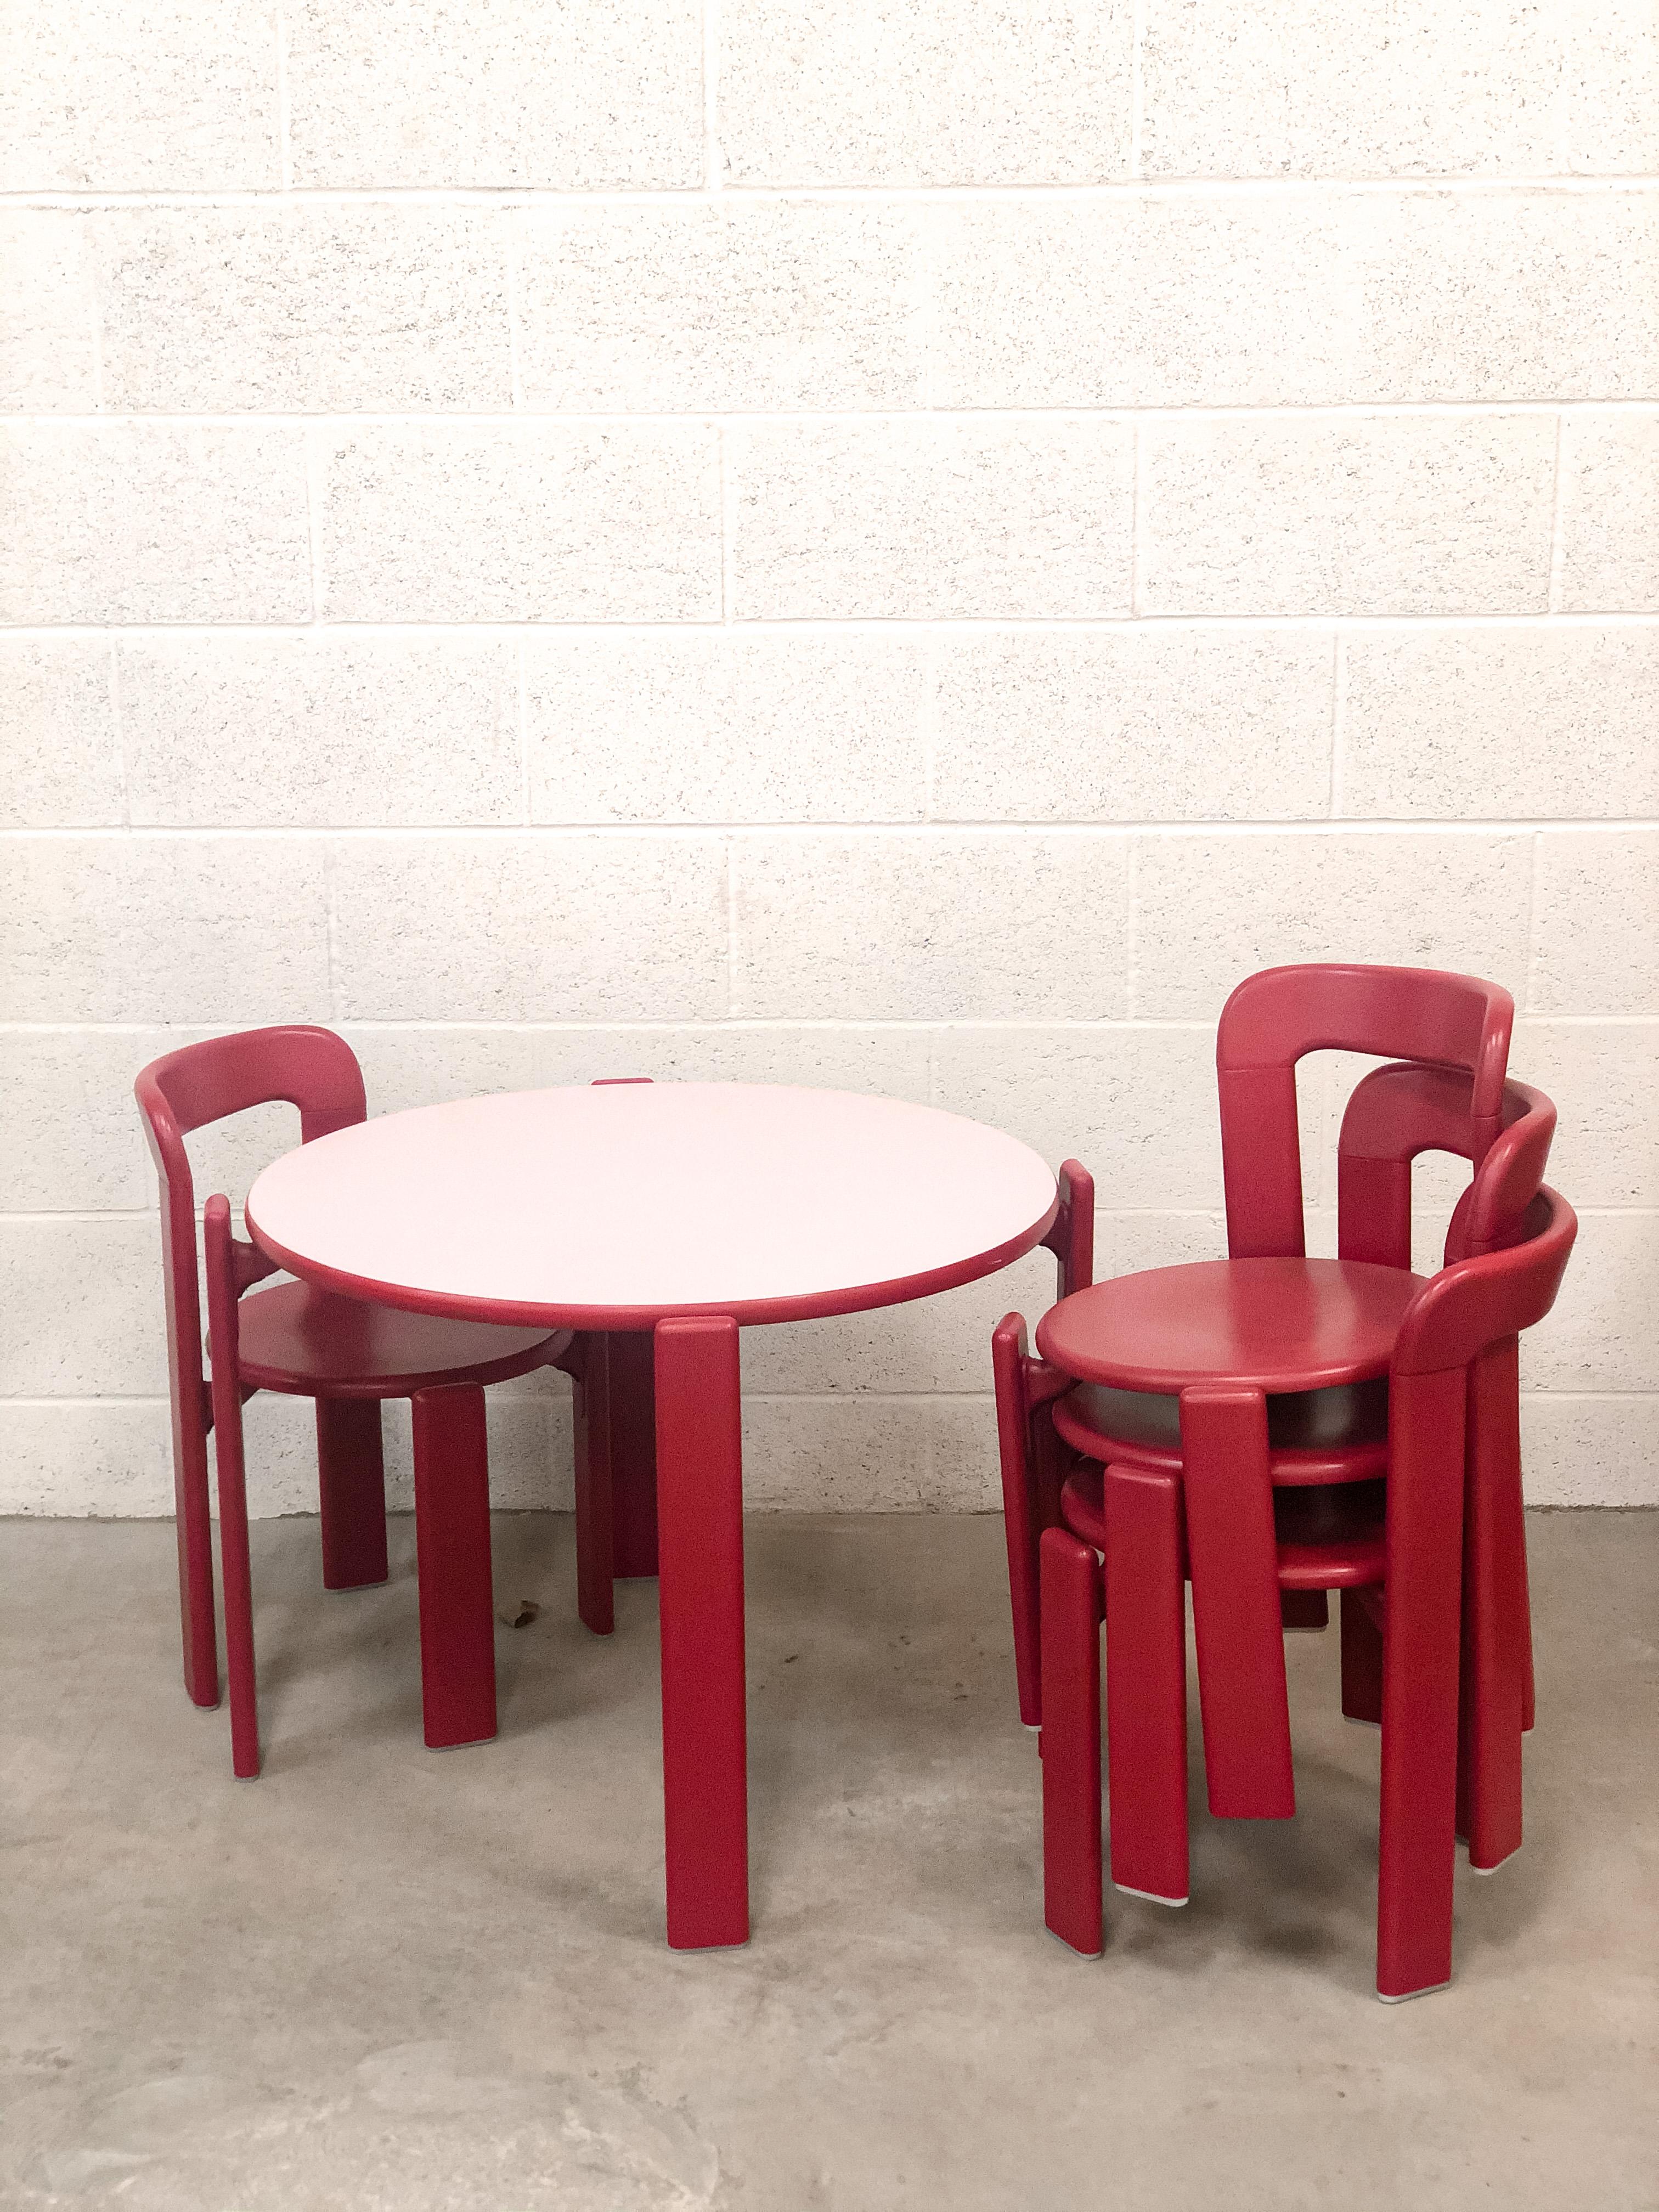 Mid-Century Modern Rey Junior Set, Kids Table and Chairs in Candy, Designed by Bruno Rey, in Stock